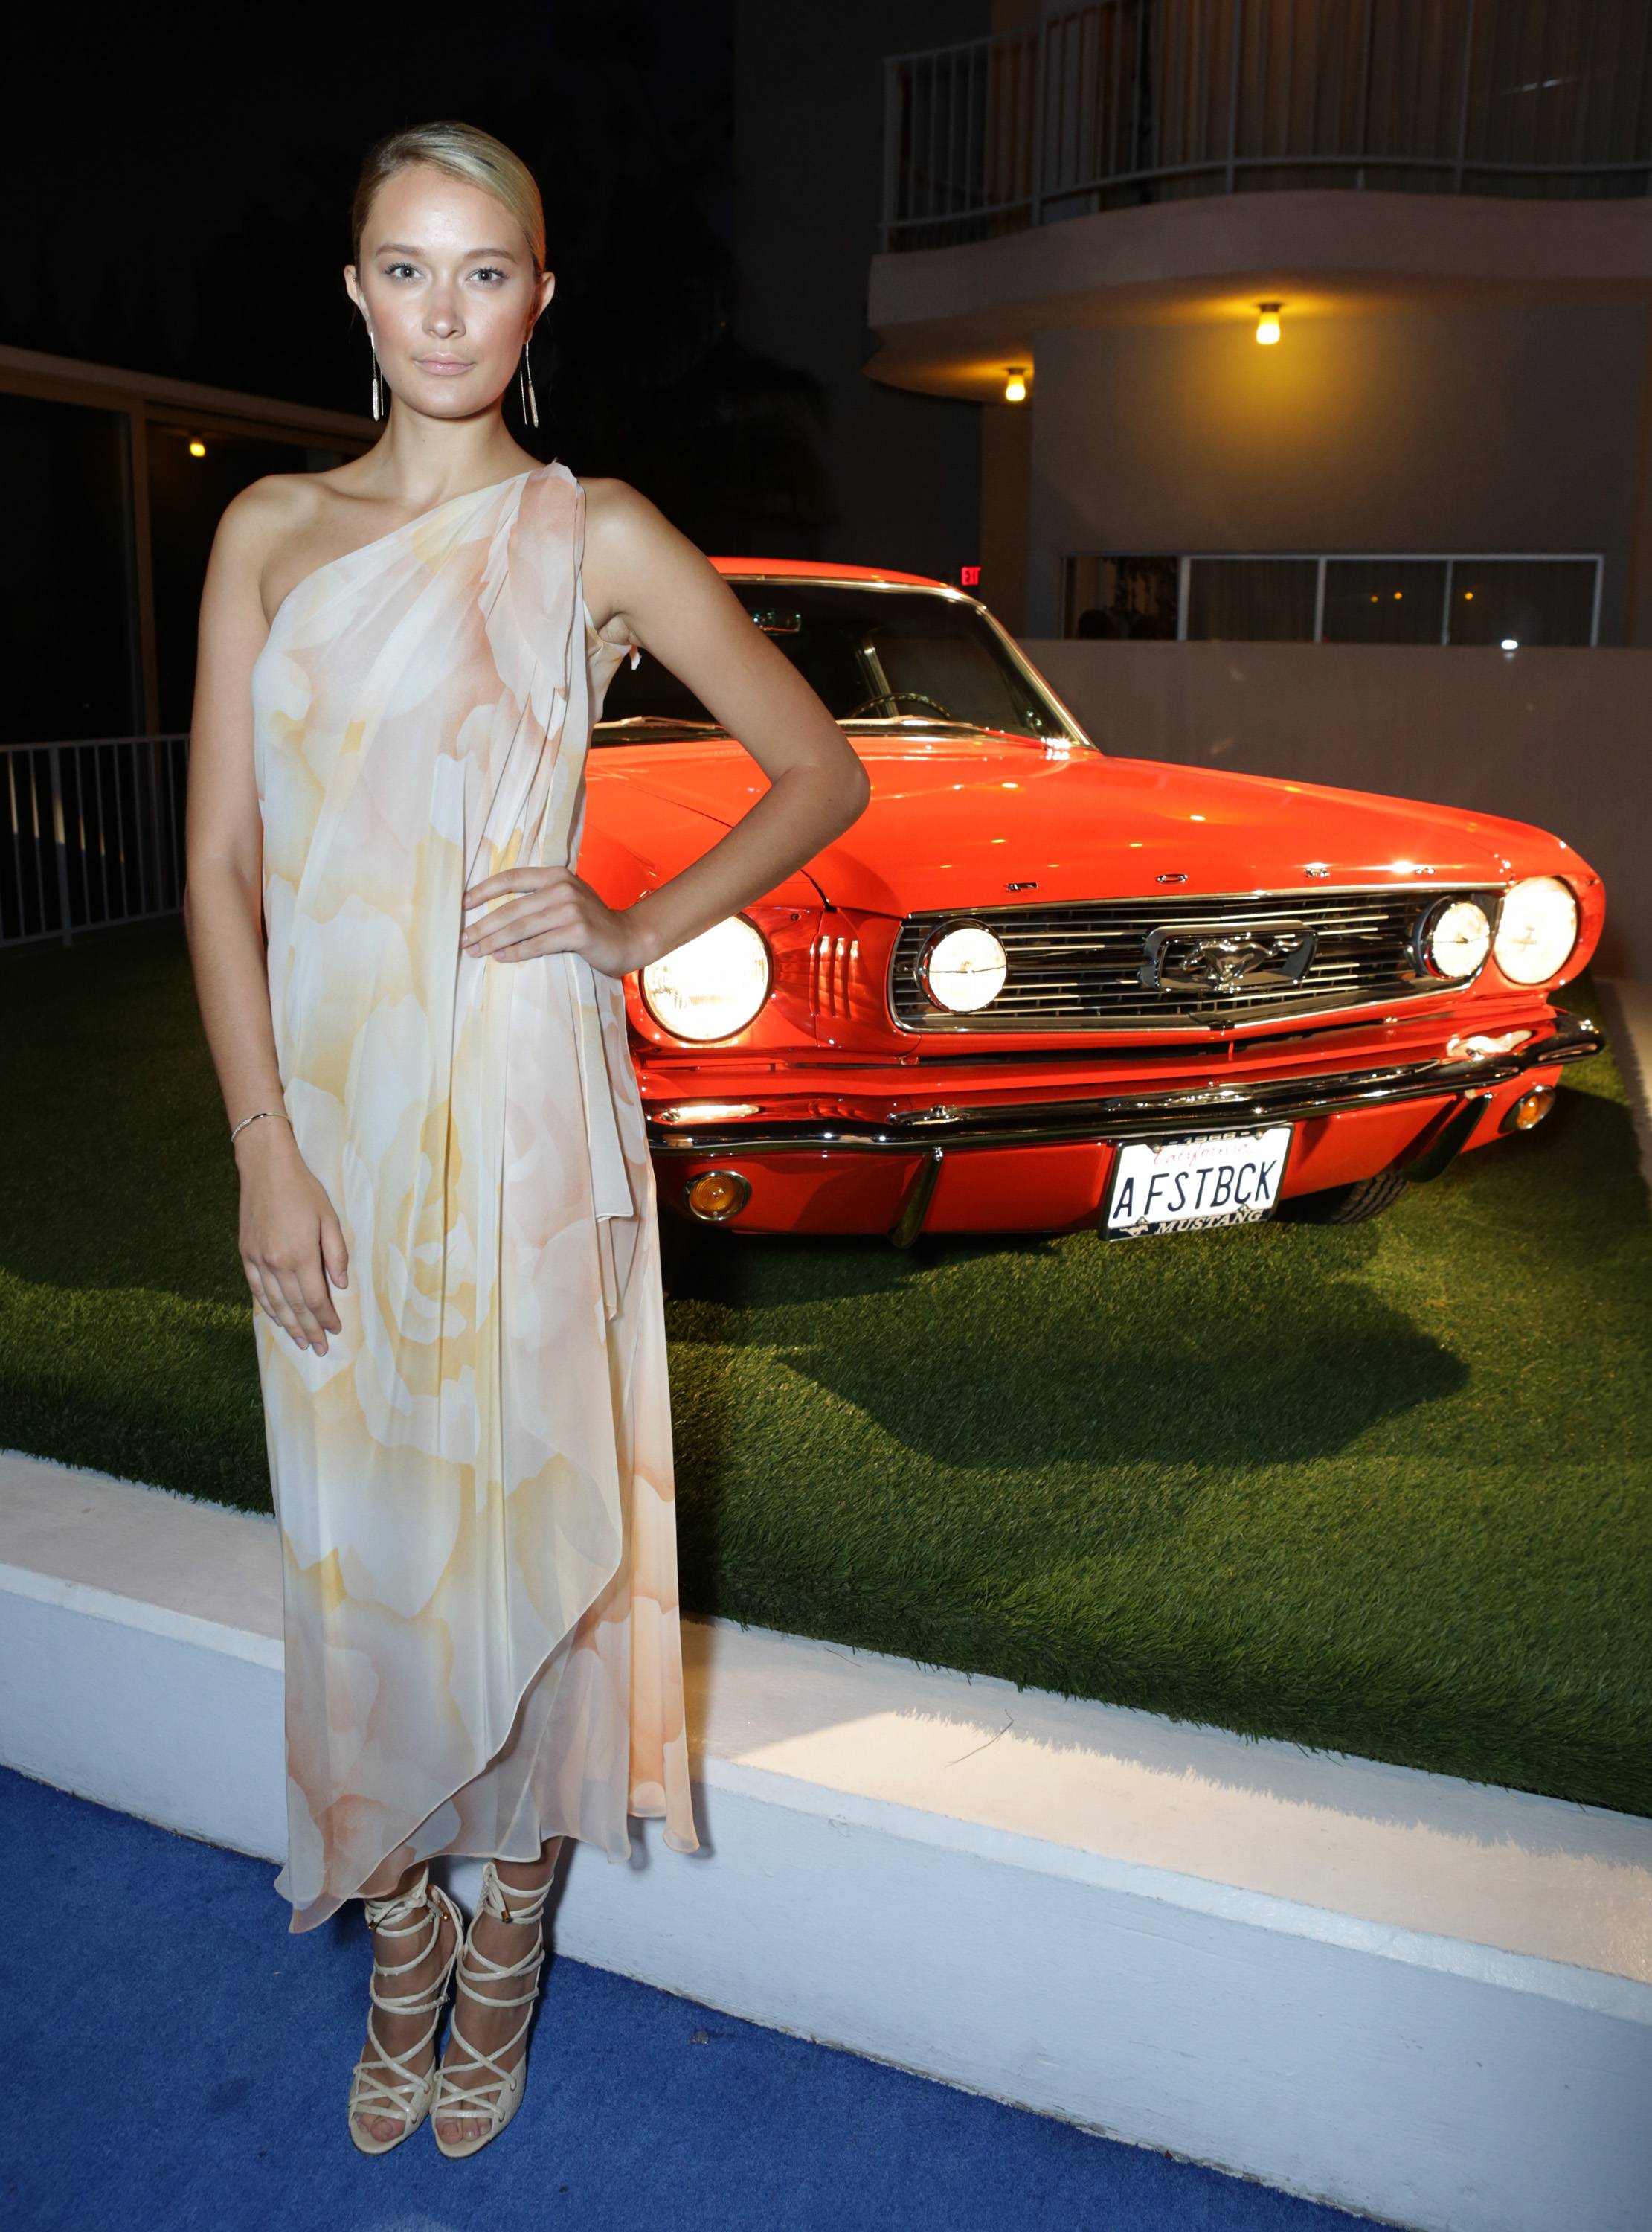 Ford Motor Company And Decades LA Explore Five Decades Of The Mustang, Music And Iconic Fashion